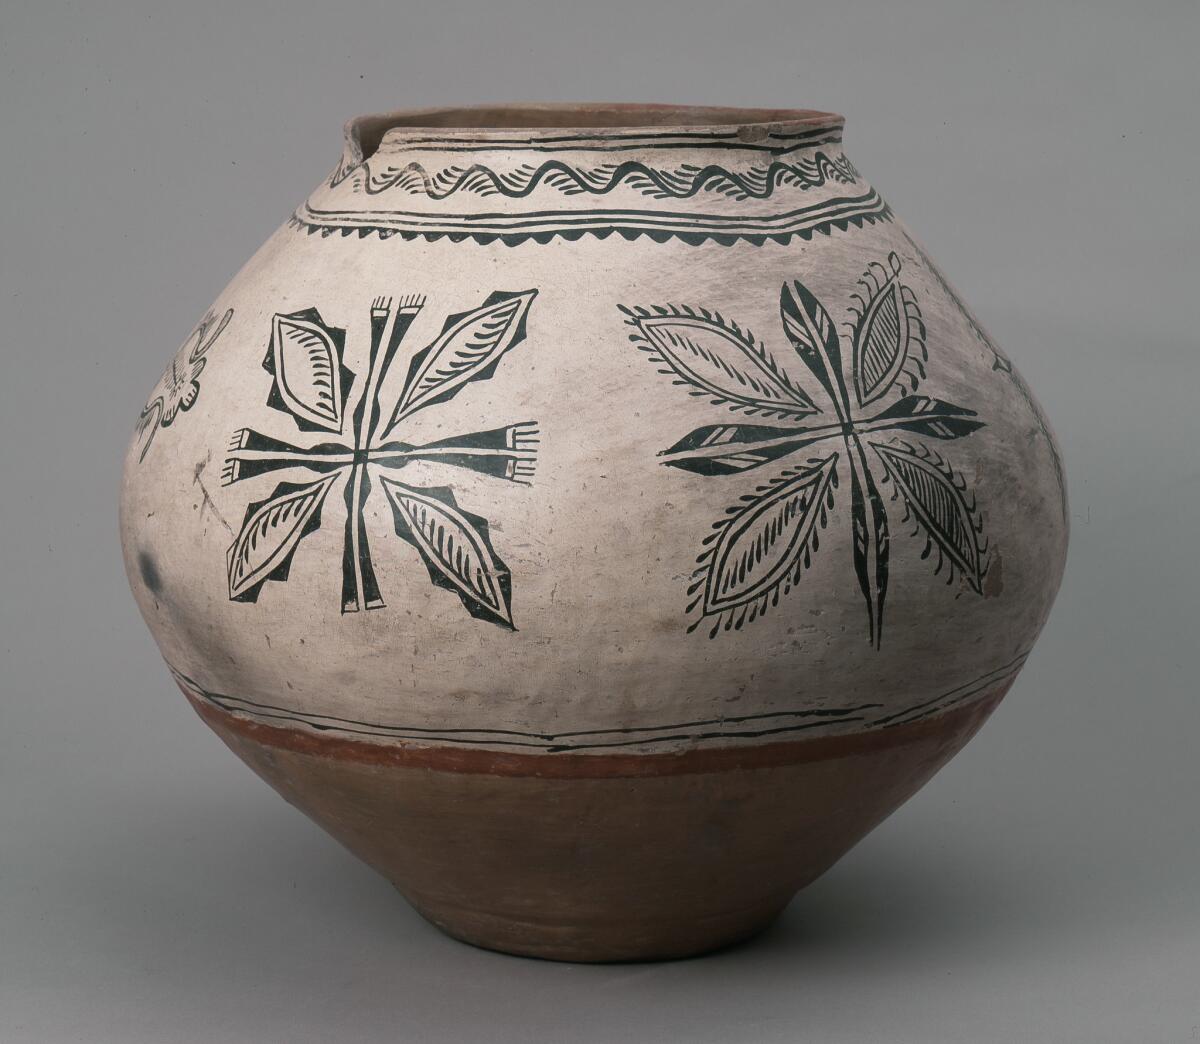 Polychrome storage jar, Tesuque Pueblo, circa 1870-1880. Anonymous Gift from the Southwest Museum of the American Indian Collection, Autry National Center.